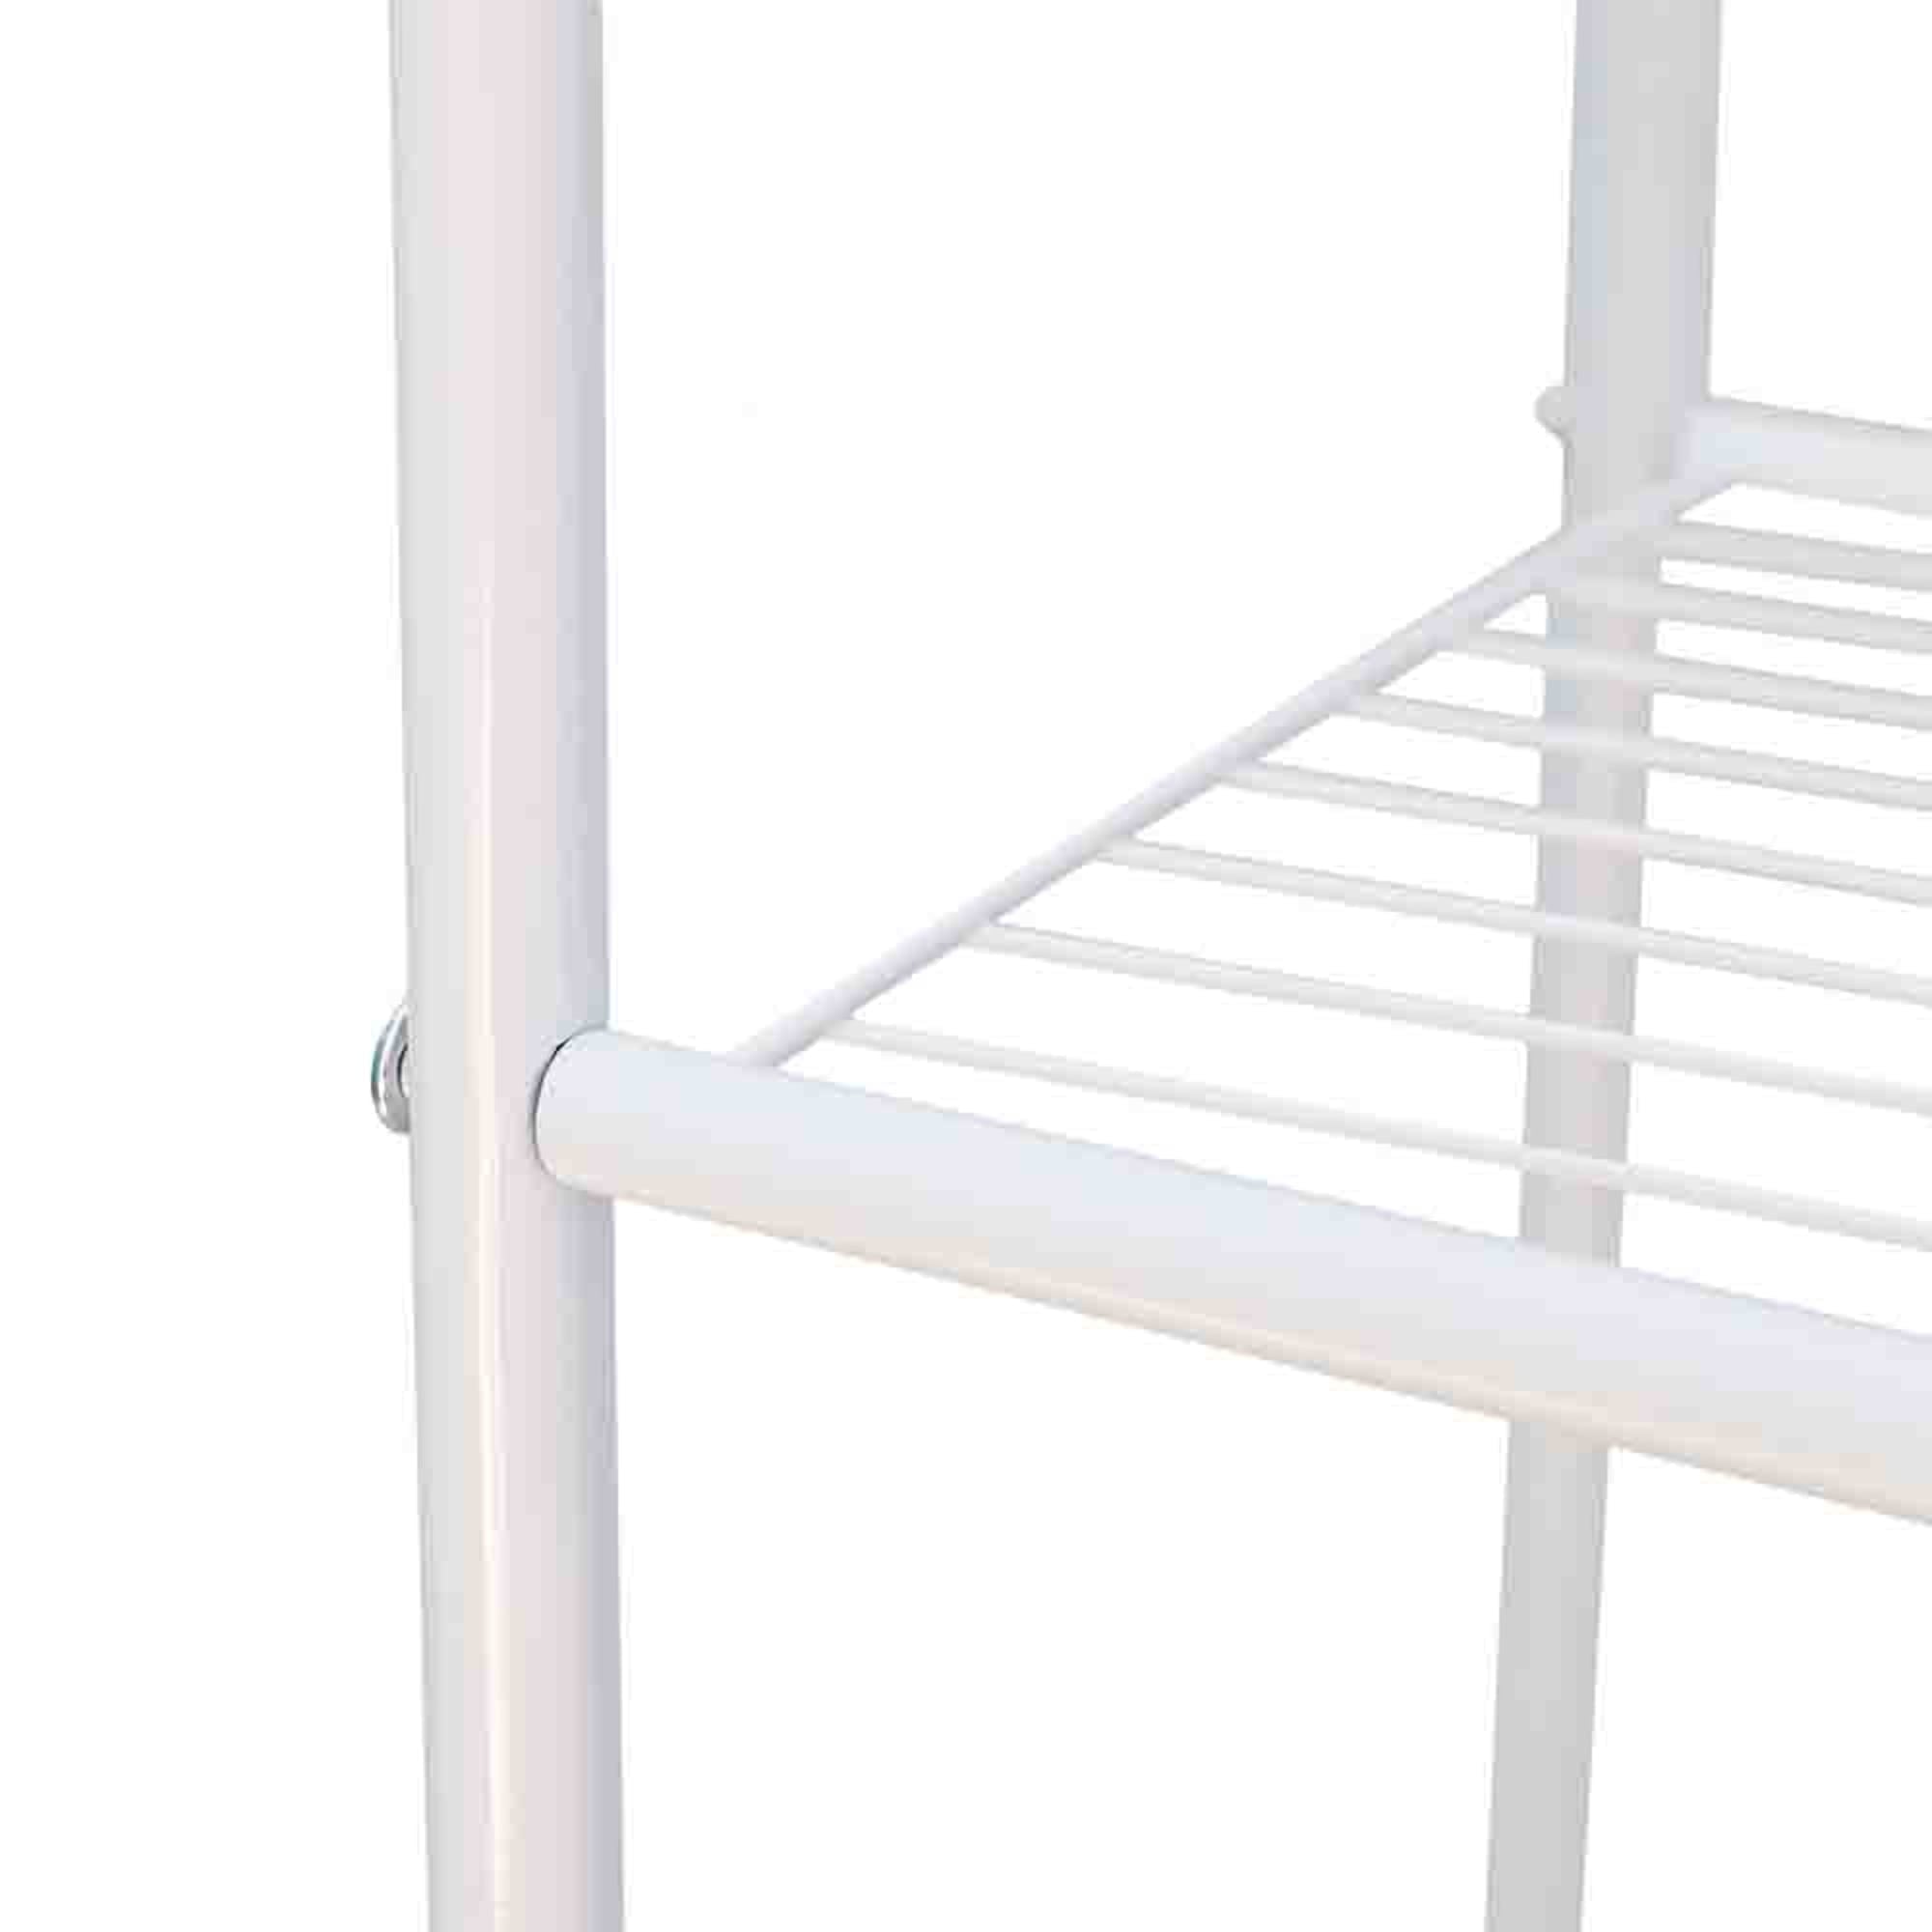 Home Basics 3 Tier Over the Toilet Steel Bathroom Space Saver, White $20.00 EACH, CASE PACK OF 6